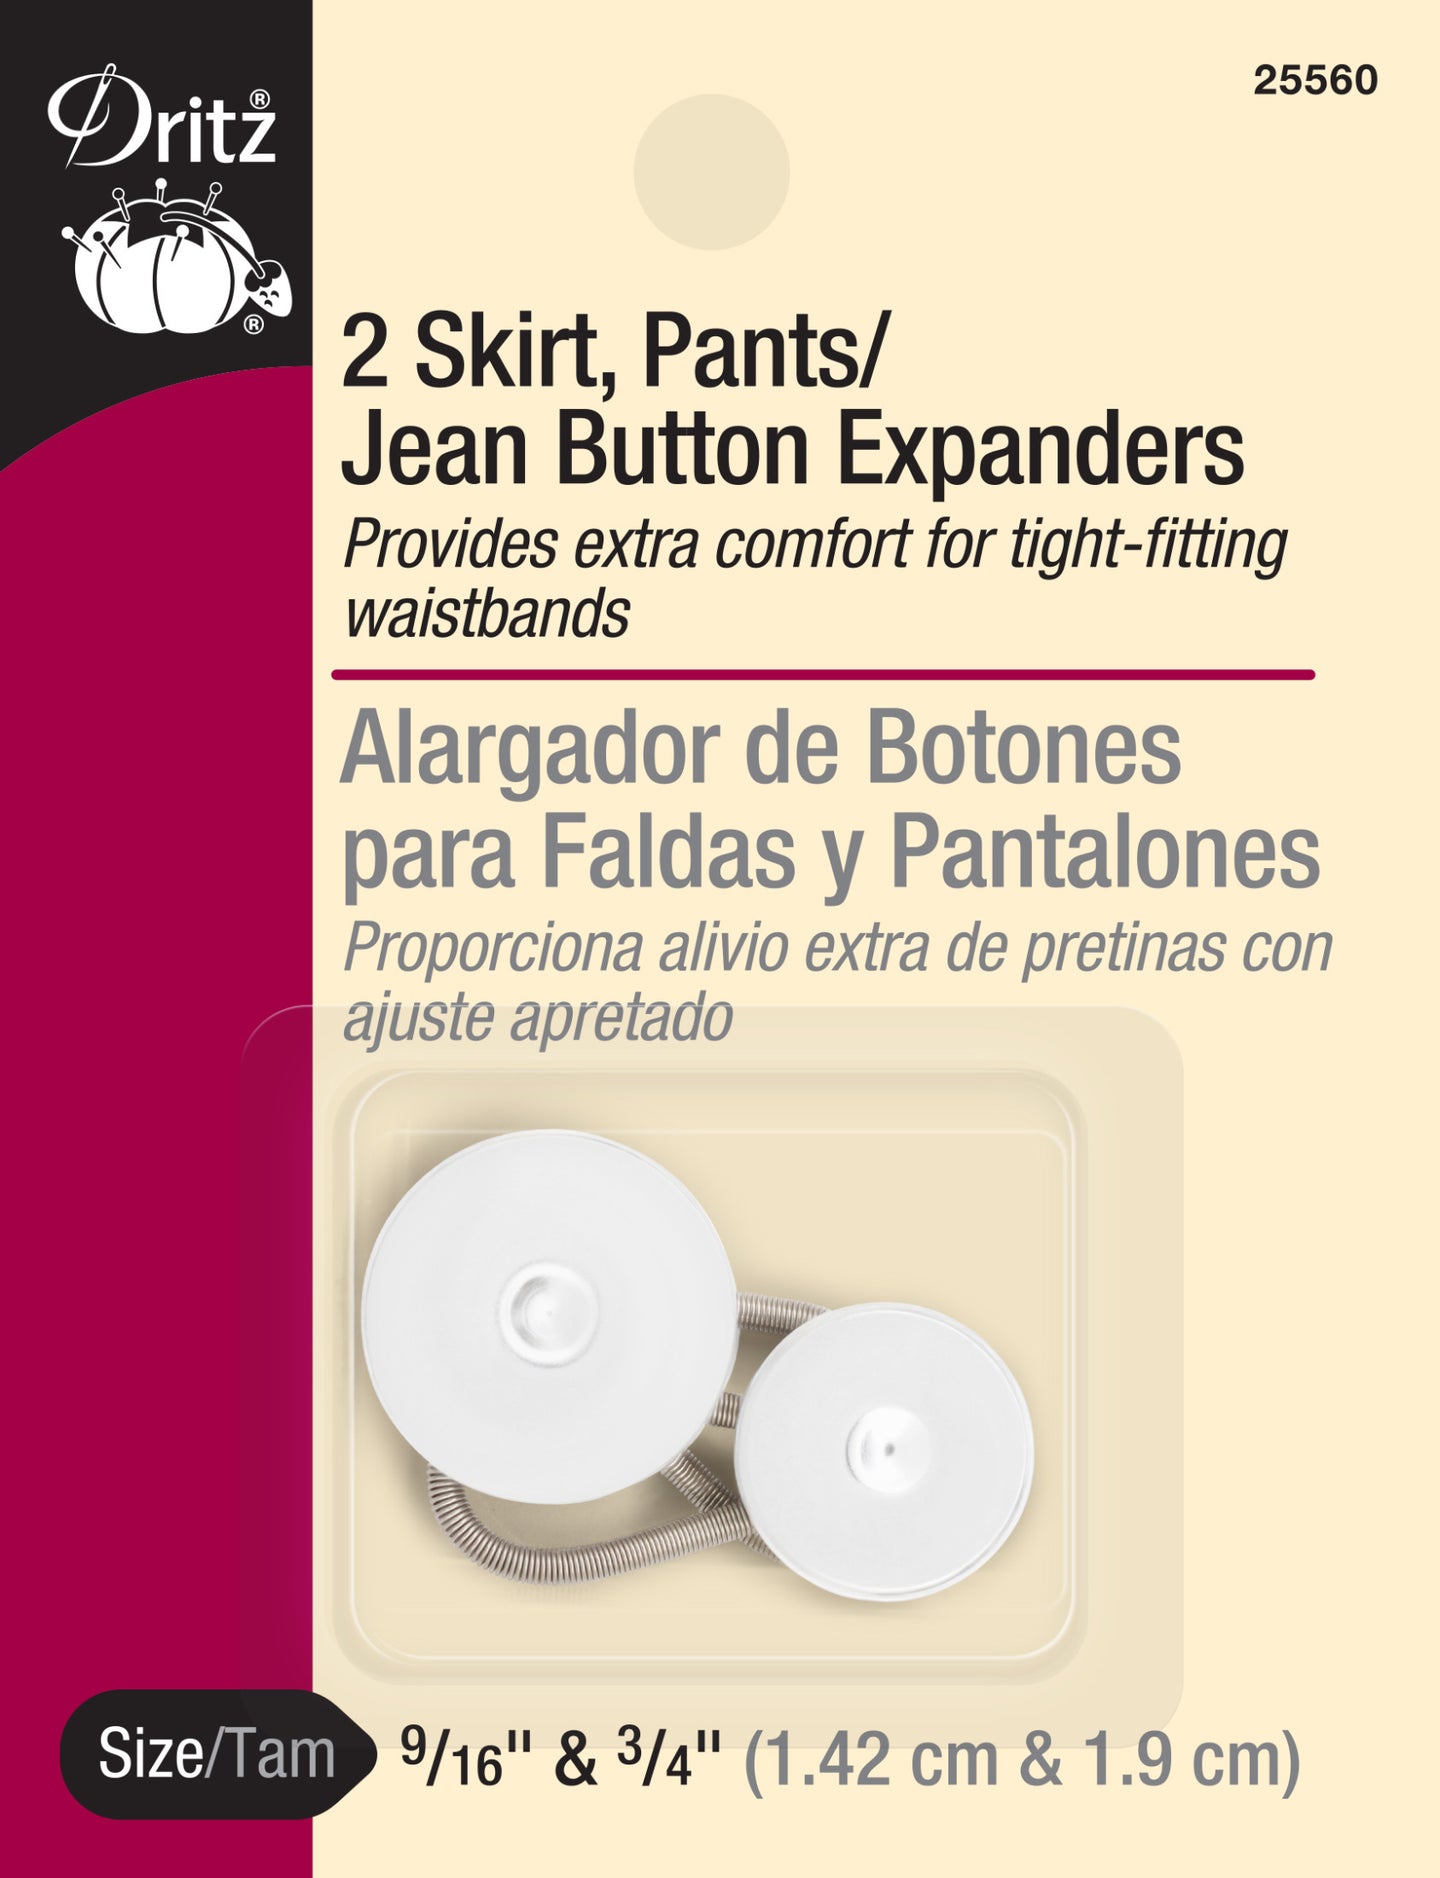 Dritz Skirt, Pants/Jeans Button Expanders, 9/16 inch & 3/4 inch